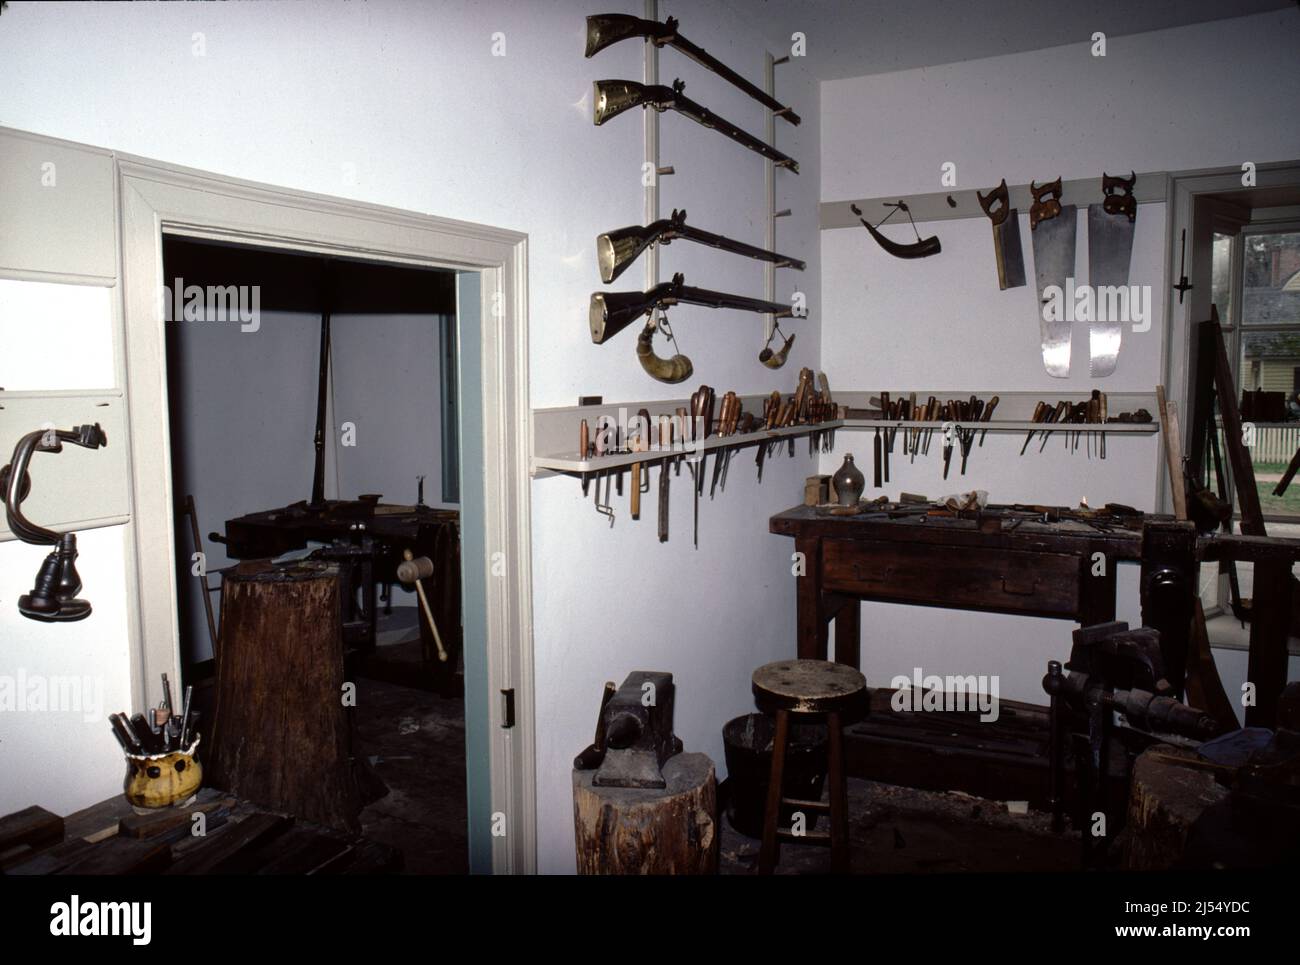 Williamsburg, VA. U.S.A. 9/1987. Master gunsmith for Colonial 18th Century rifles, pistols and fowling shotguns.  Using 18th century gunsmithing tools craft each firearm from wood stock to lock. Stock Photo